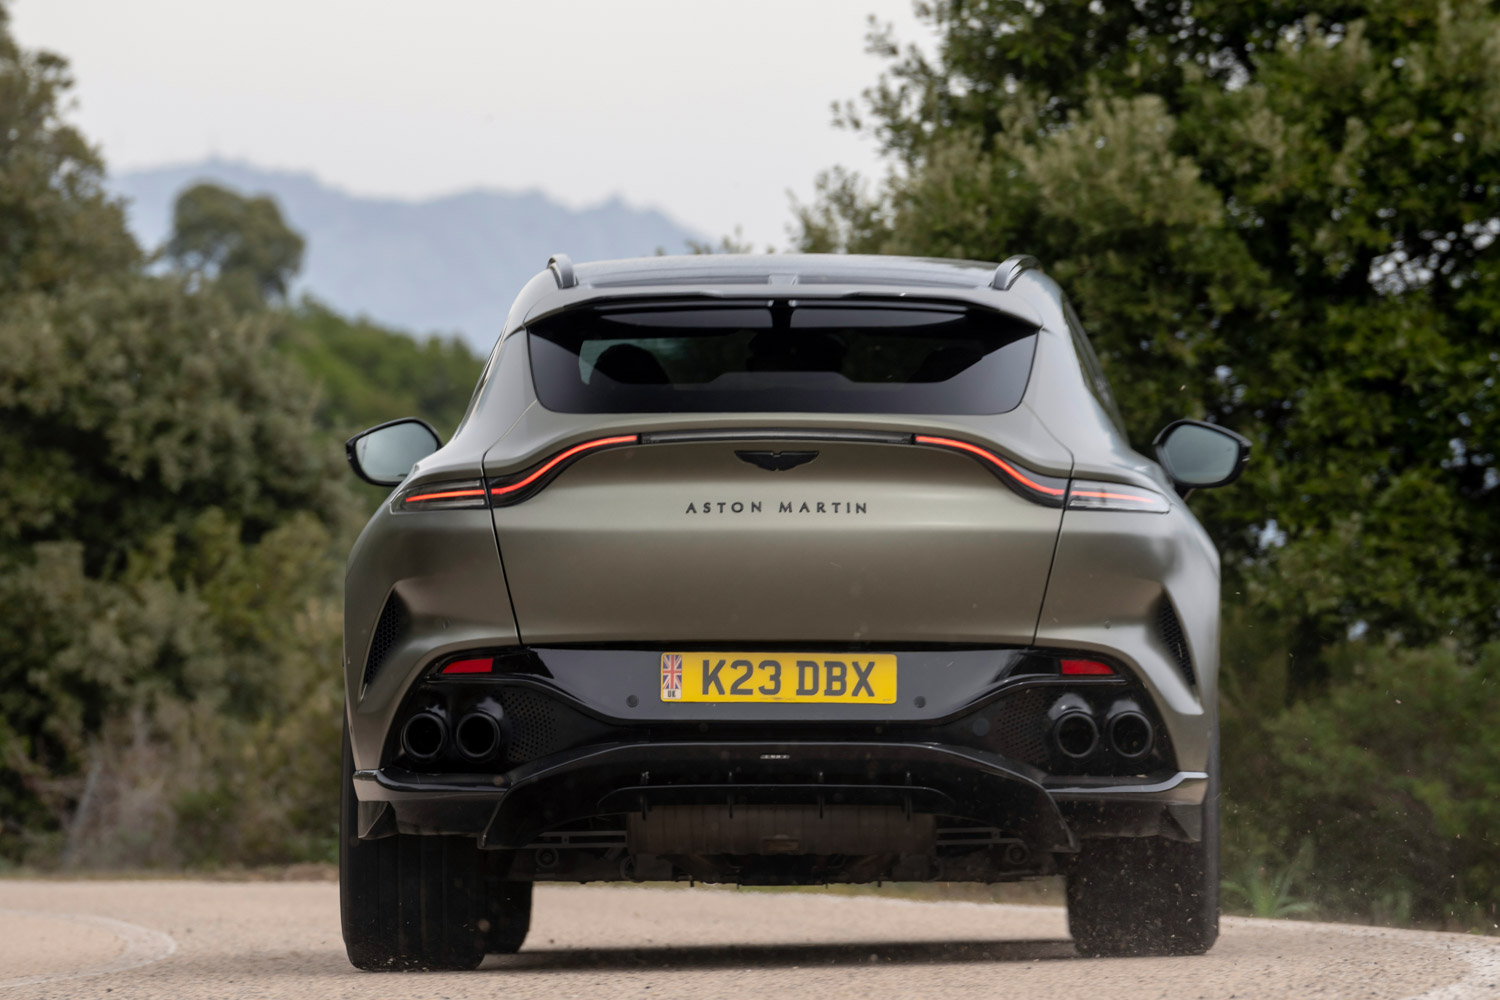 Aston Martin to reveal two new models at Pebble Beach